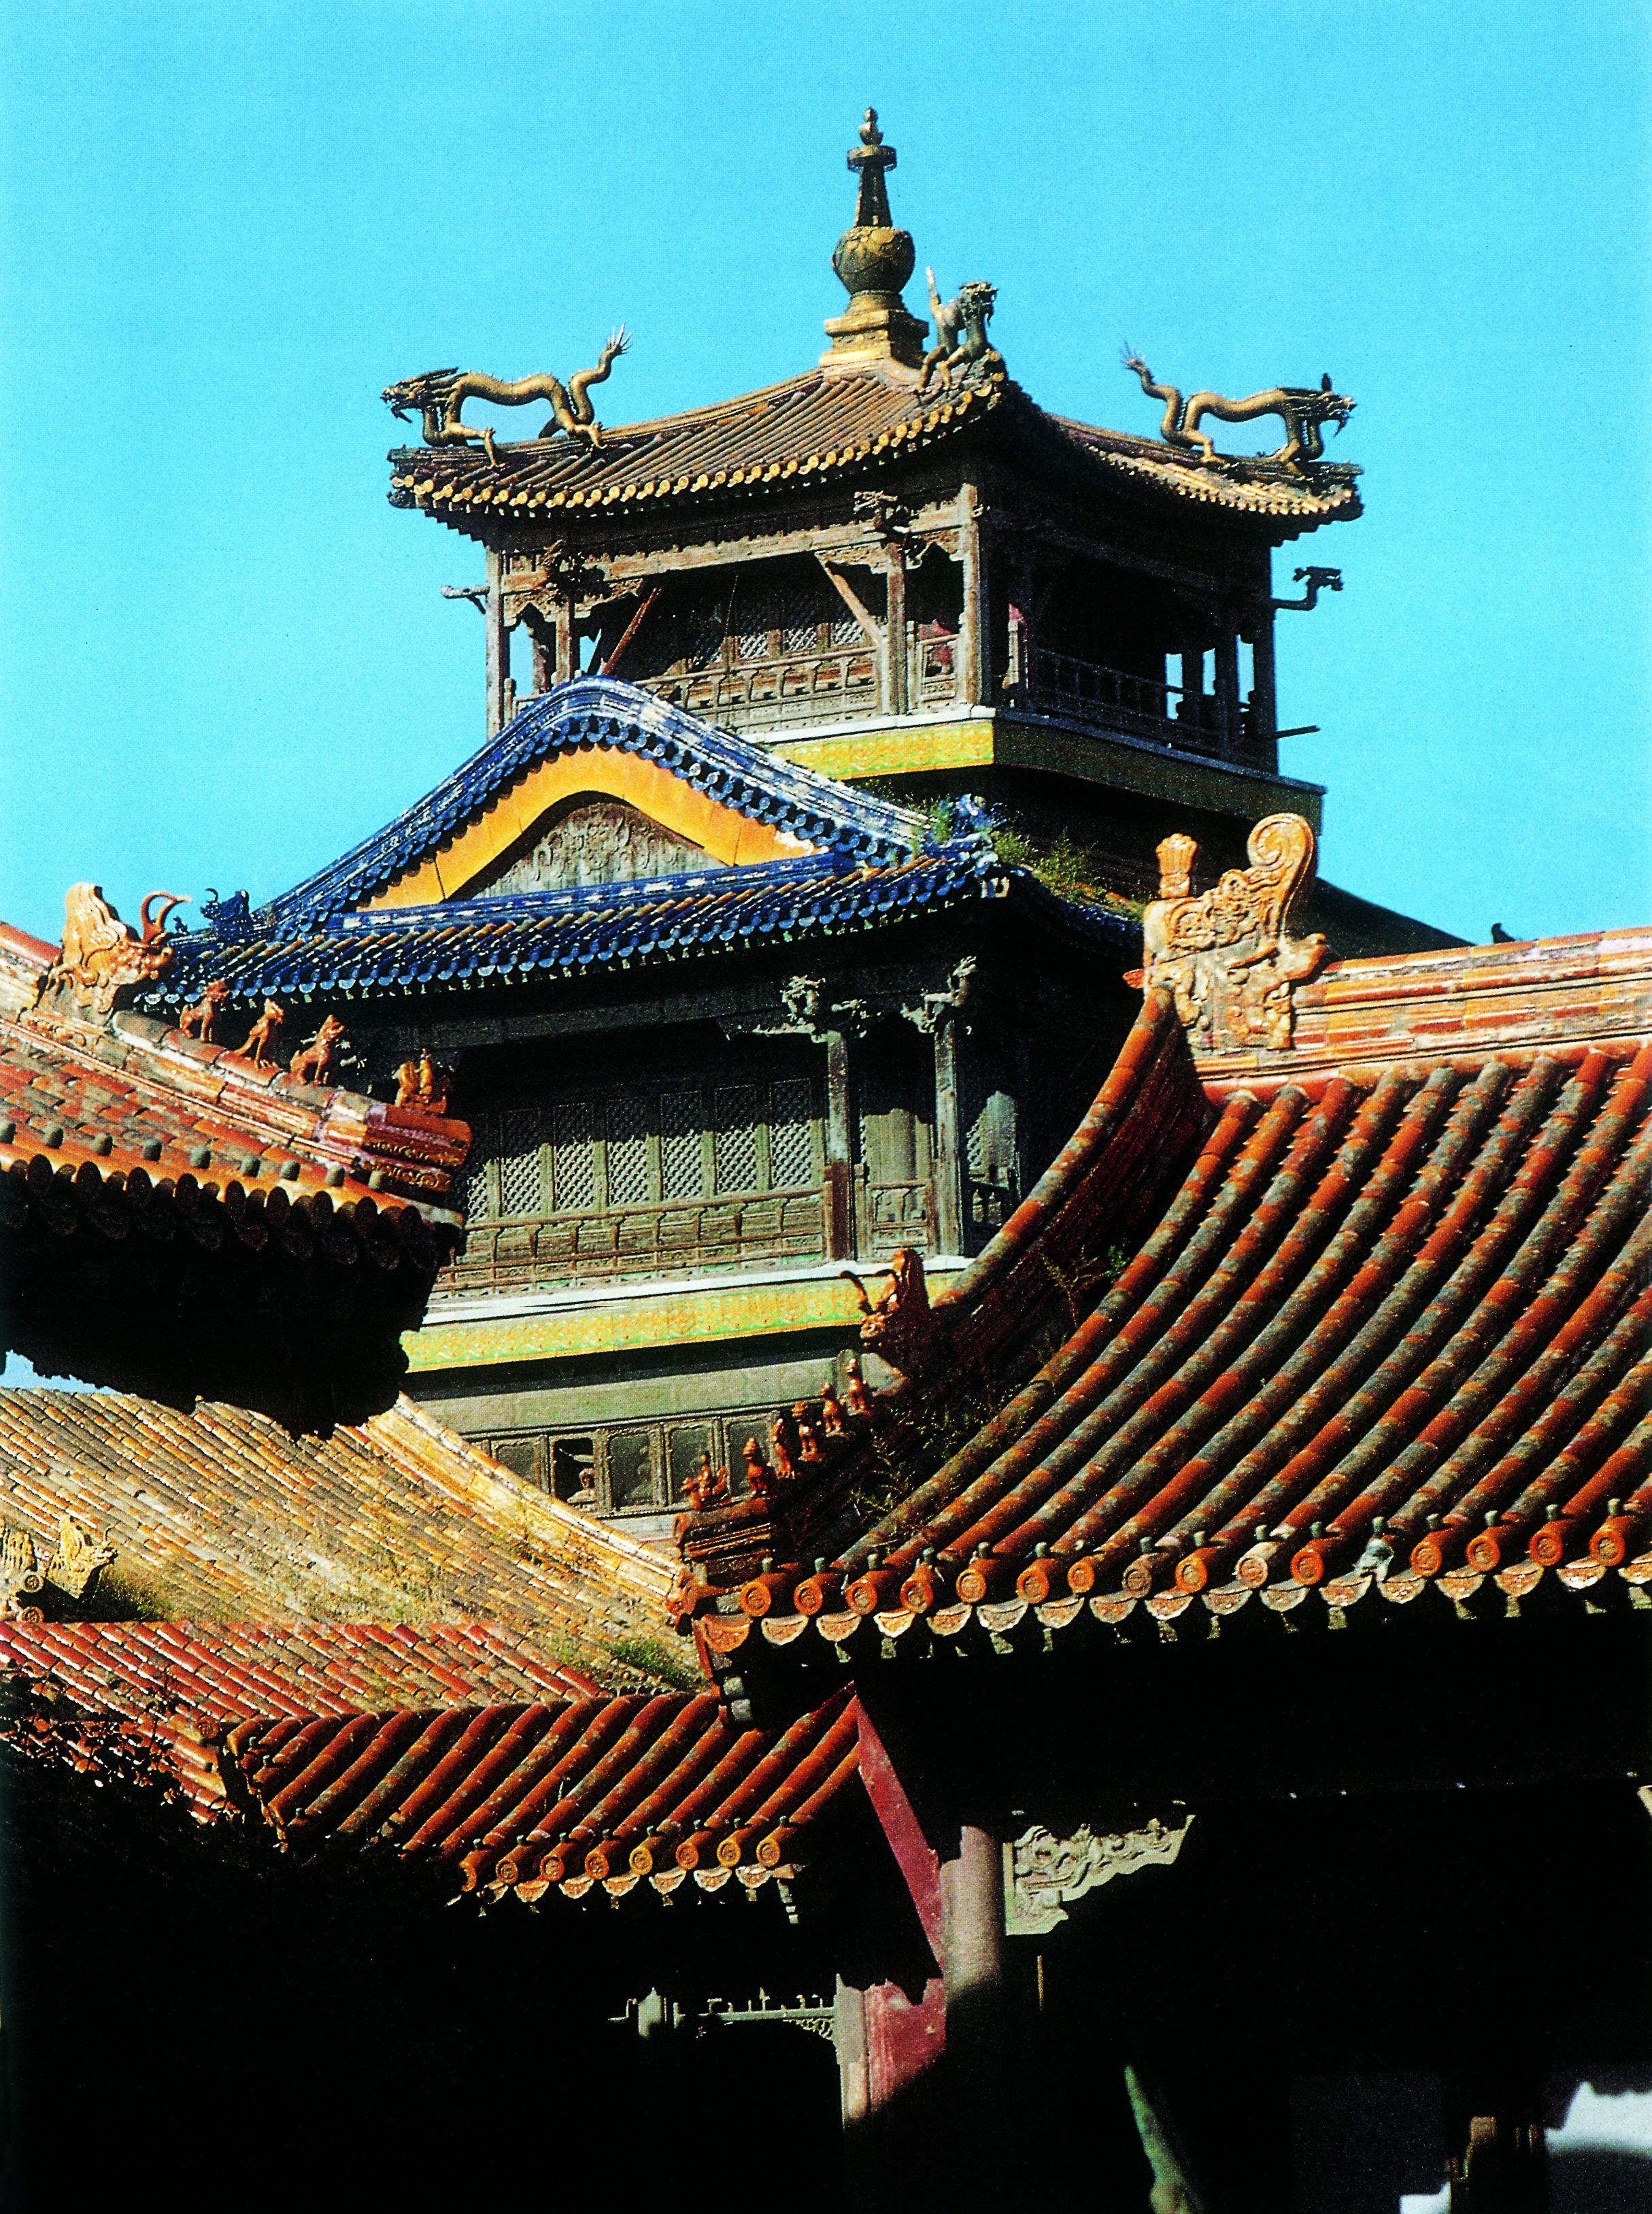 The Pavilion of the Rain of Flowers. Built during the reign of Qing ...